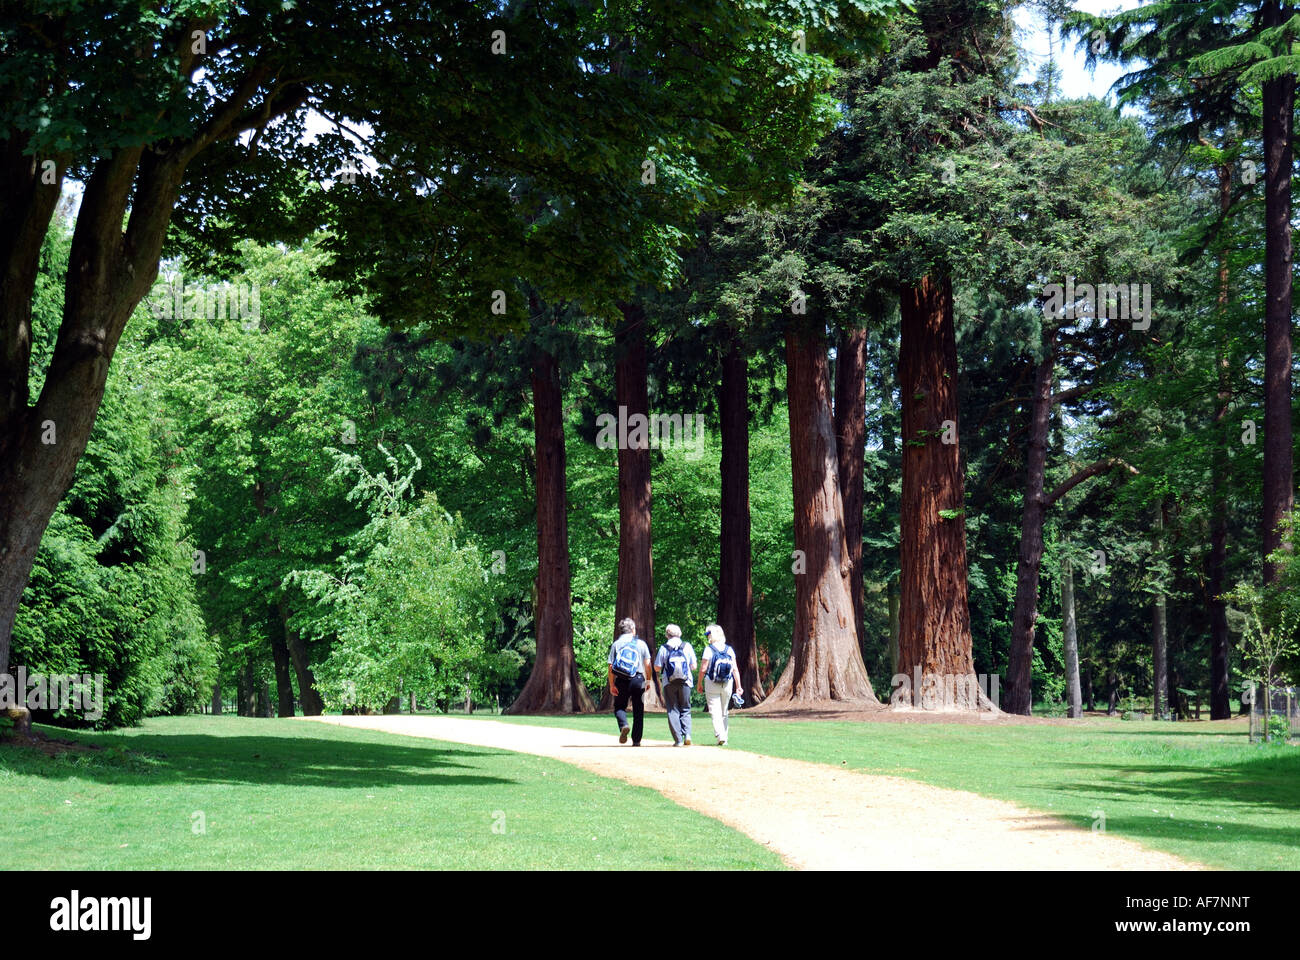 Group walking on path, Valley Gardens, The Royal Landscape, Windsor Great Park, Virginia Water, Surrey, England, United Kingdom Stock Photo